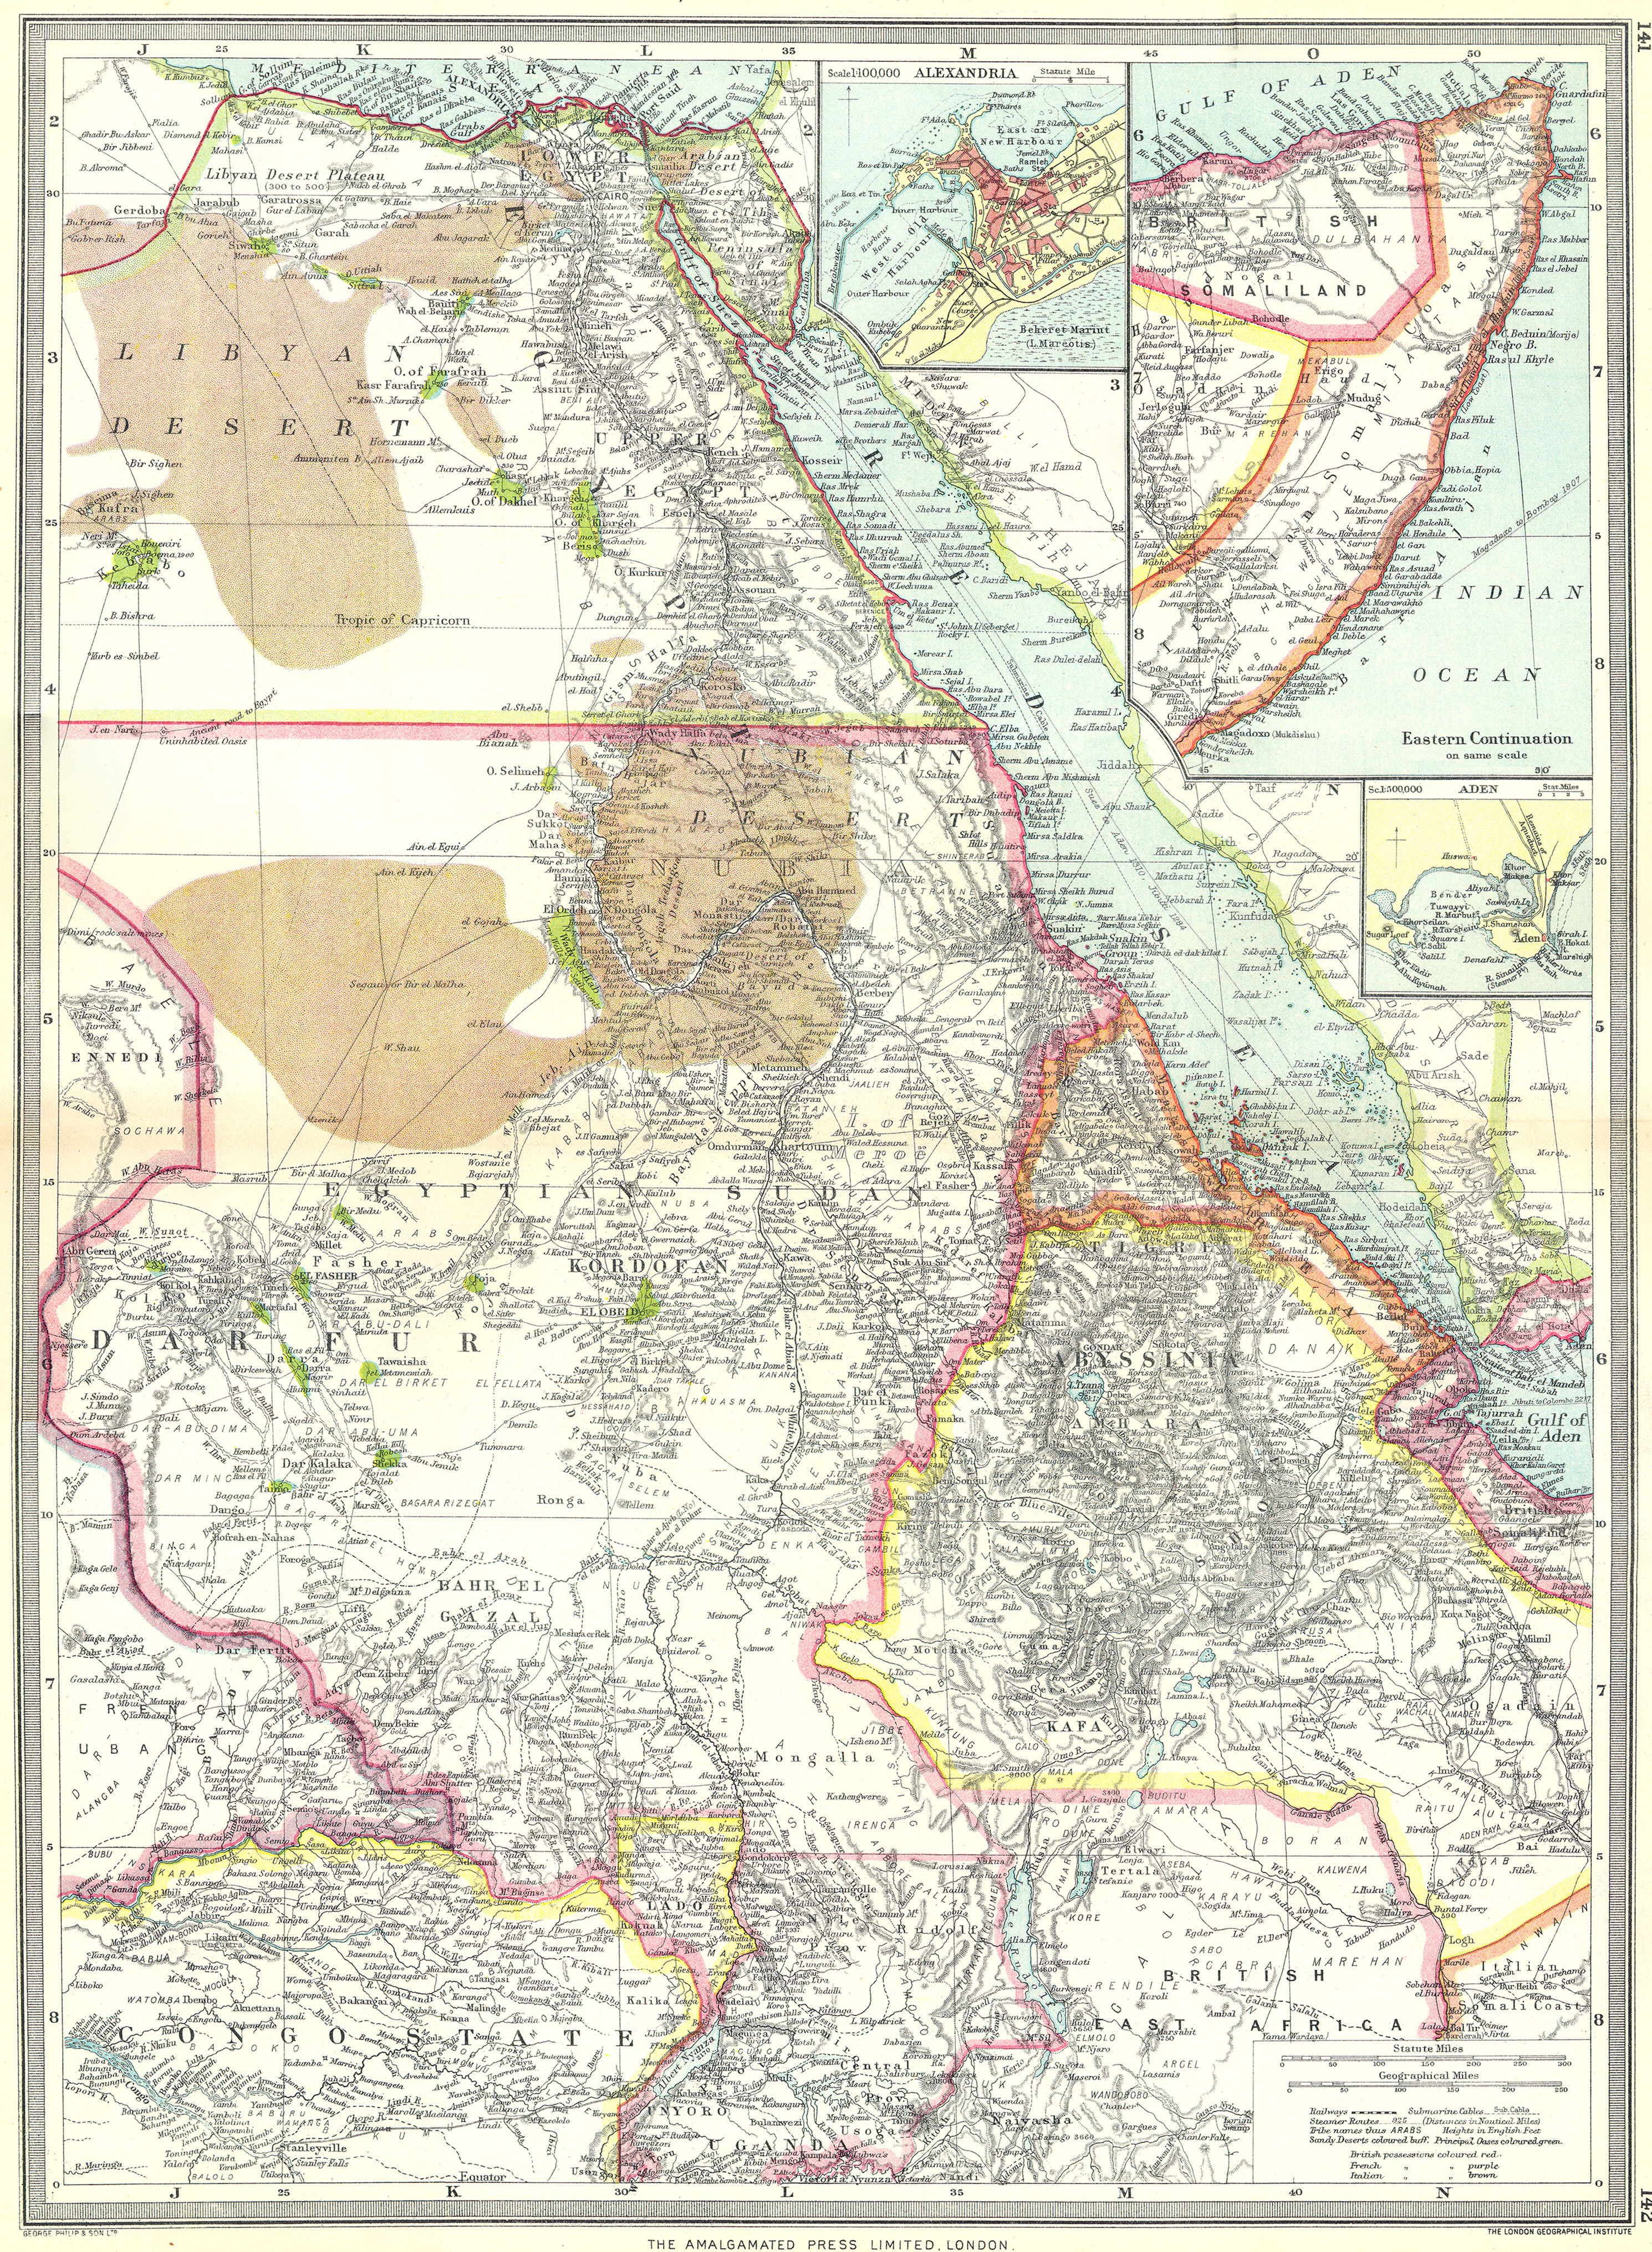 Associate Product EGYPT SUDAN ABYSSINIA. Alexandria; Eastern Continuation; Aden 1907 old map